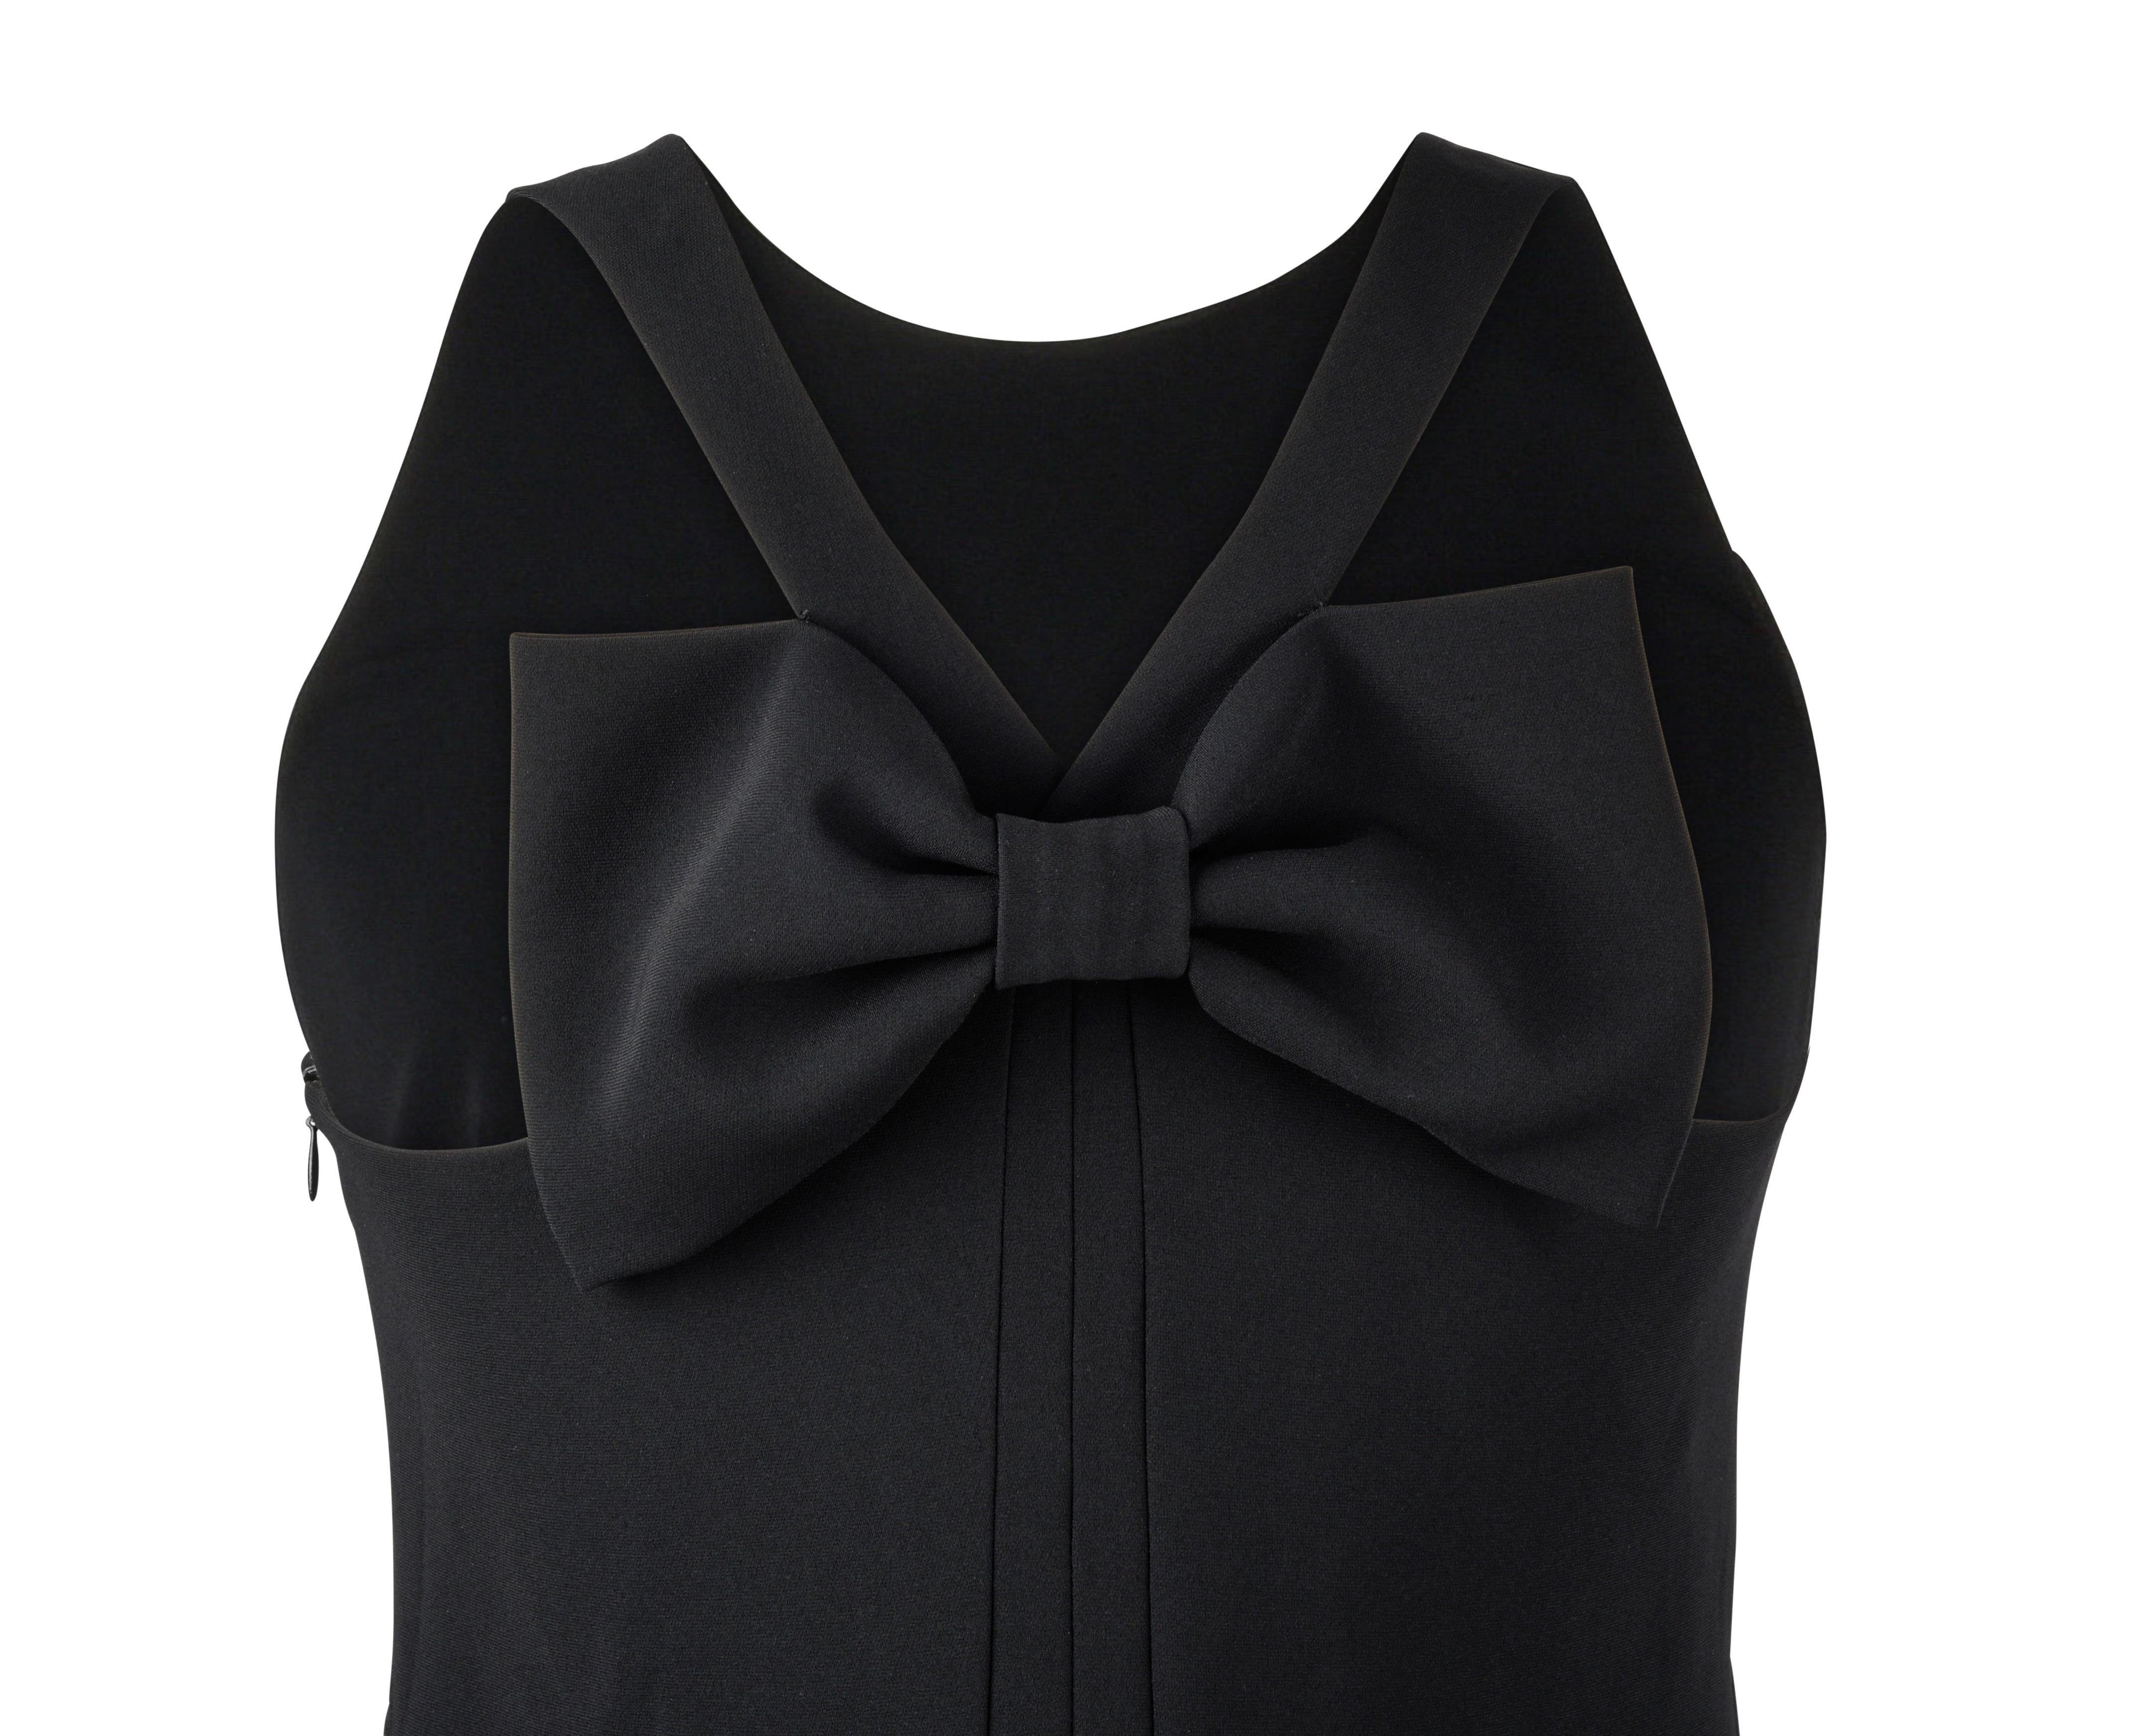 Moschino Dress Black Racer Cut Shoulder Rear Bow and Pleat Detail 42 / 8  2